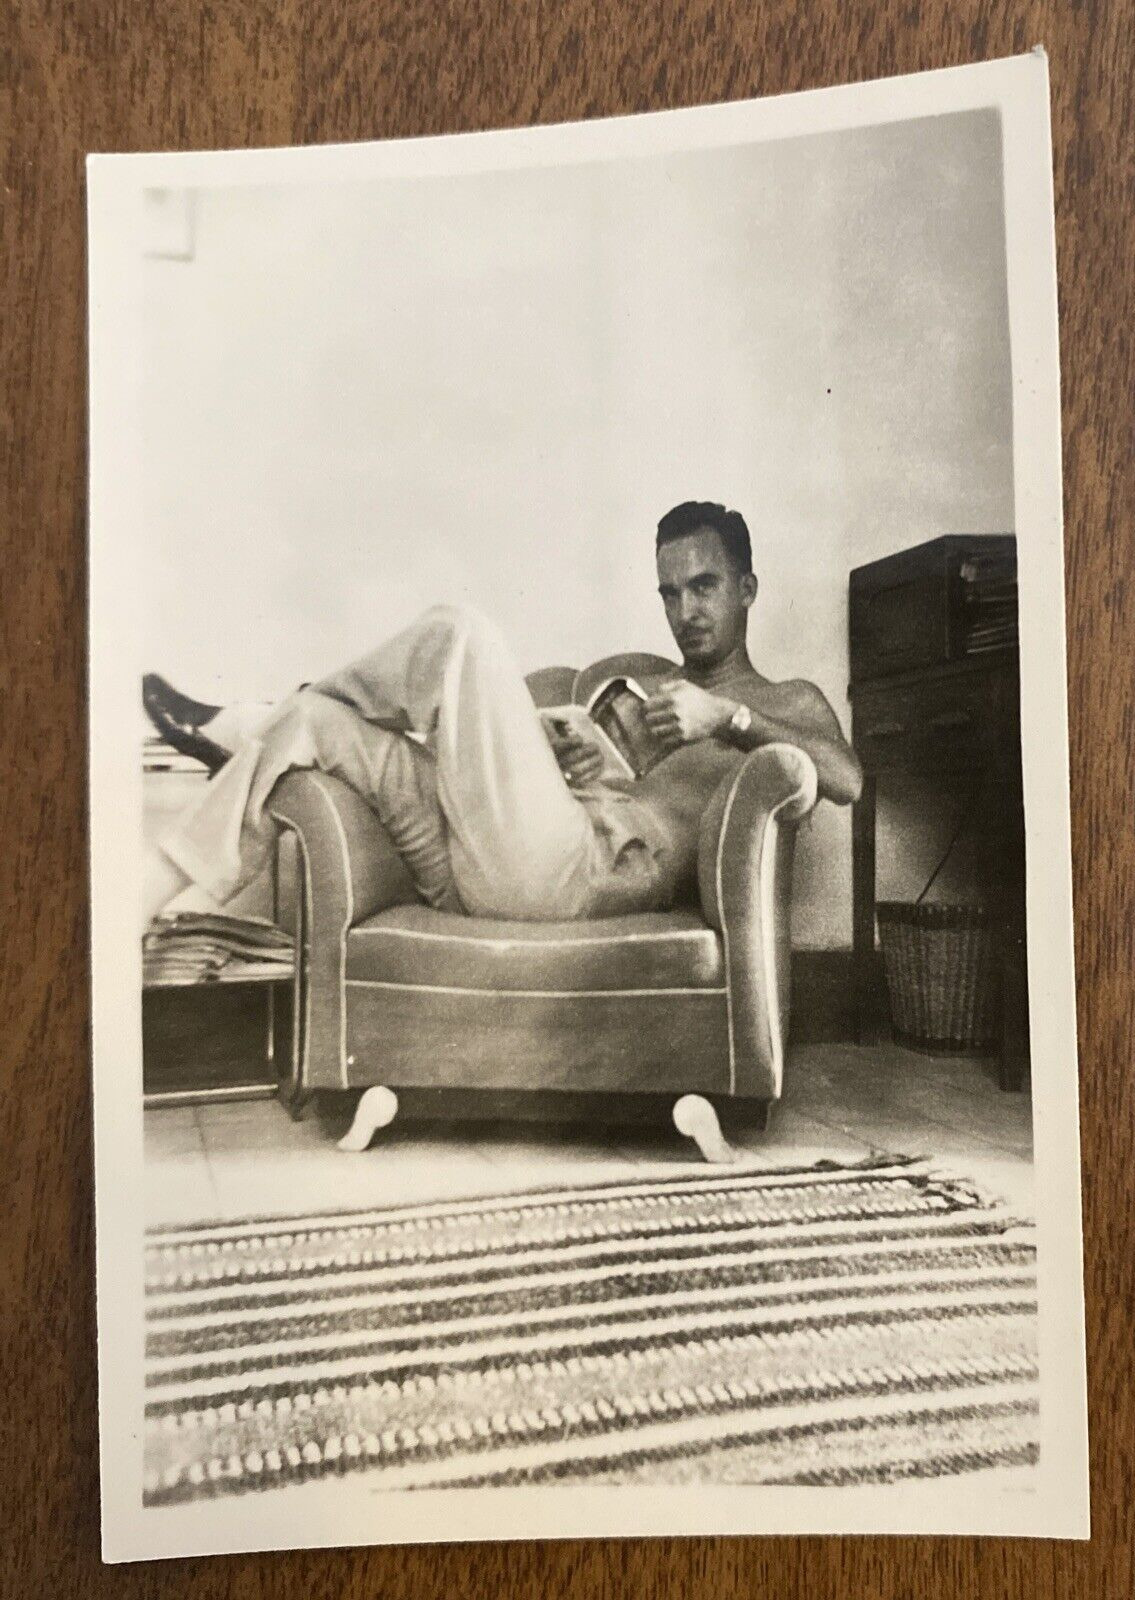 1940s Handsome Shirtless Man Reading Book Lounging Gay Interest Real Photo P4q17